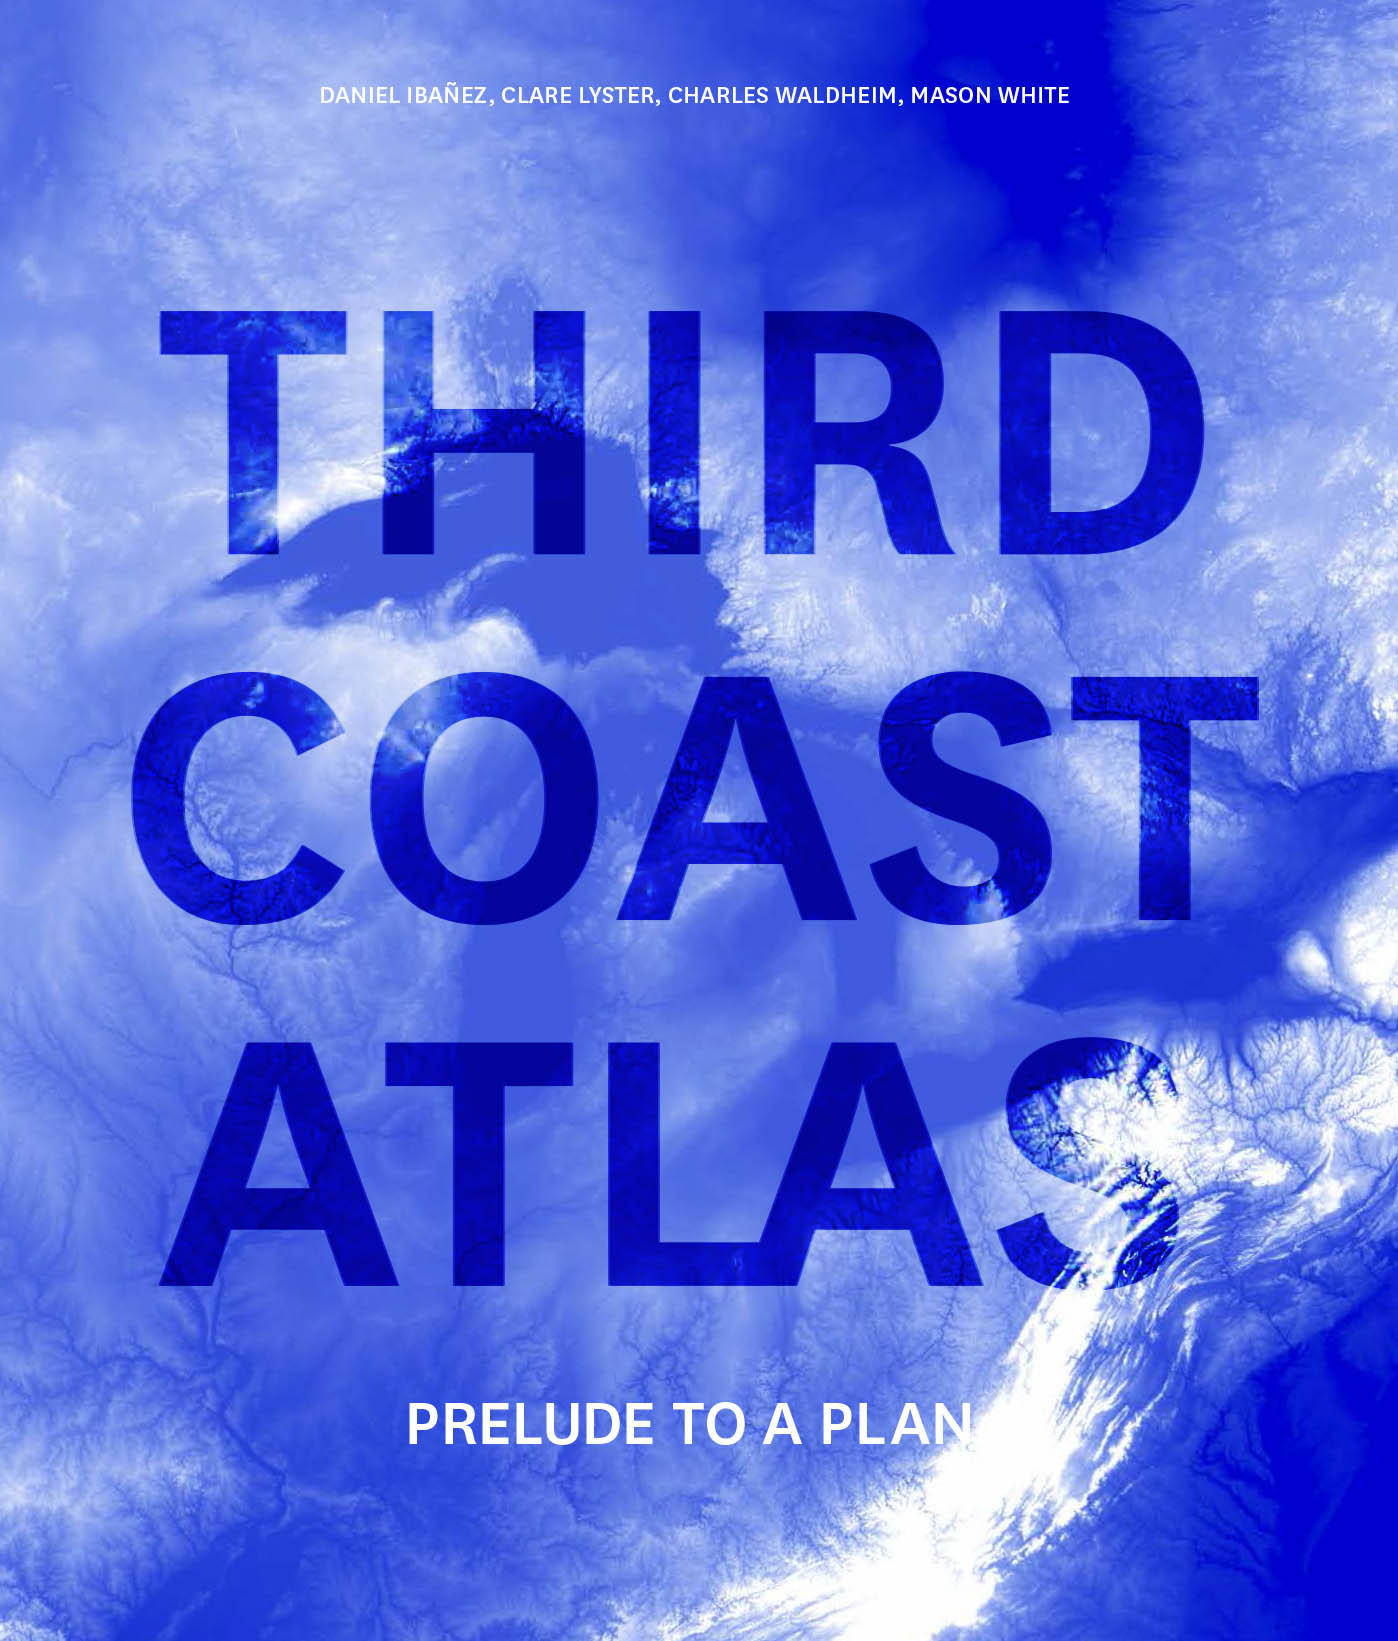 Third Coast edited by Mason White, Clare Lyster, Charles Waldheim, Daniel Ibañez, and others